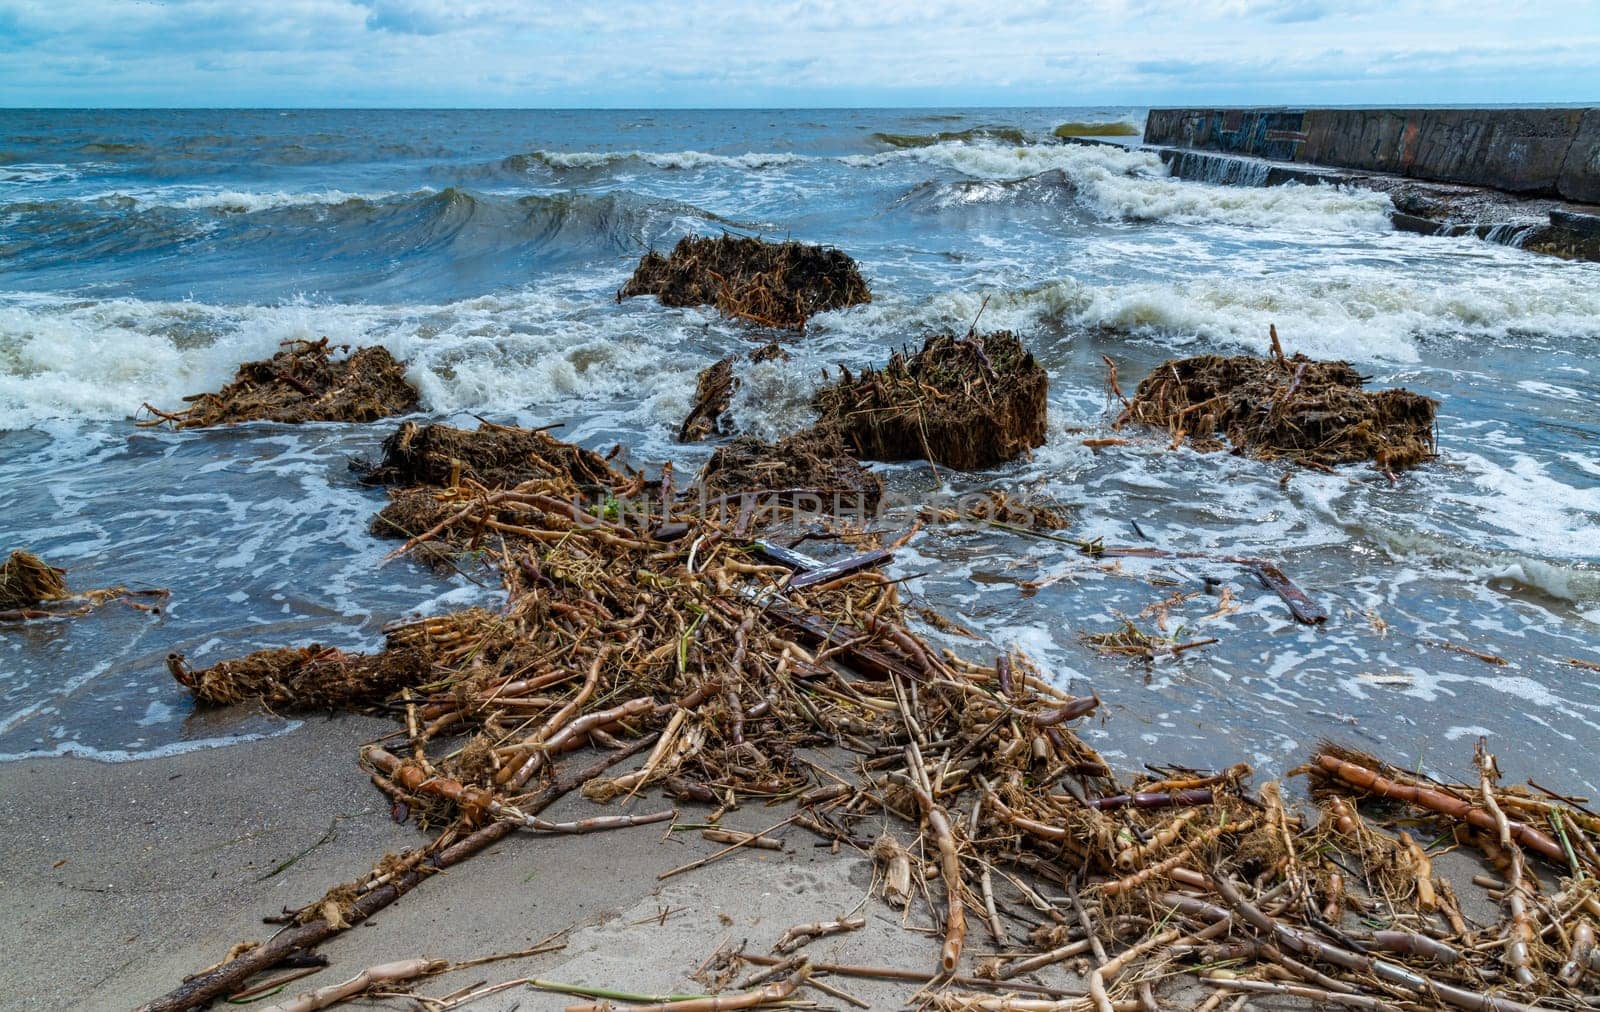 The consequences of the dam break of the Kakhovka power plant, the current brought garbage and floating islands of reeds and river plants to the beaches of Odessa by Hydrobiolog